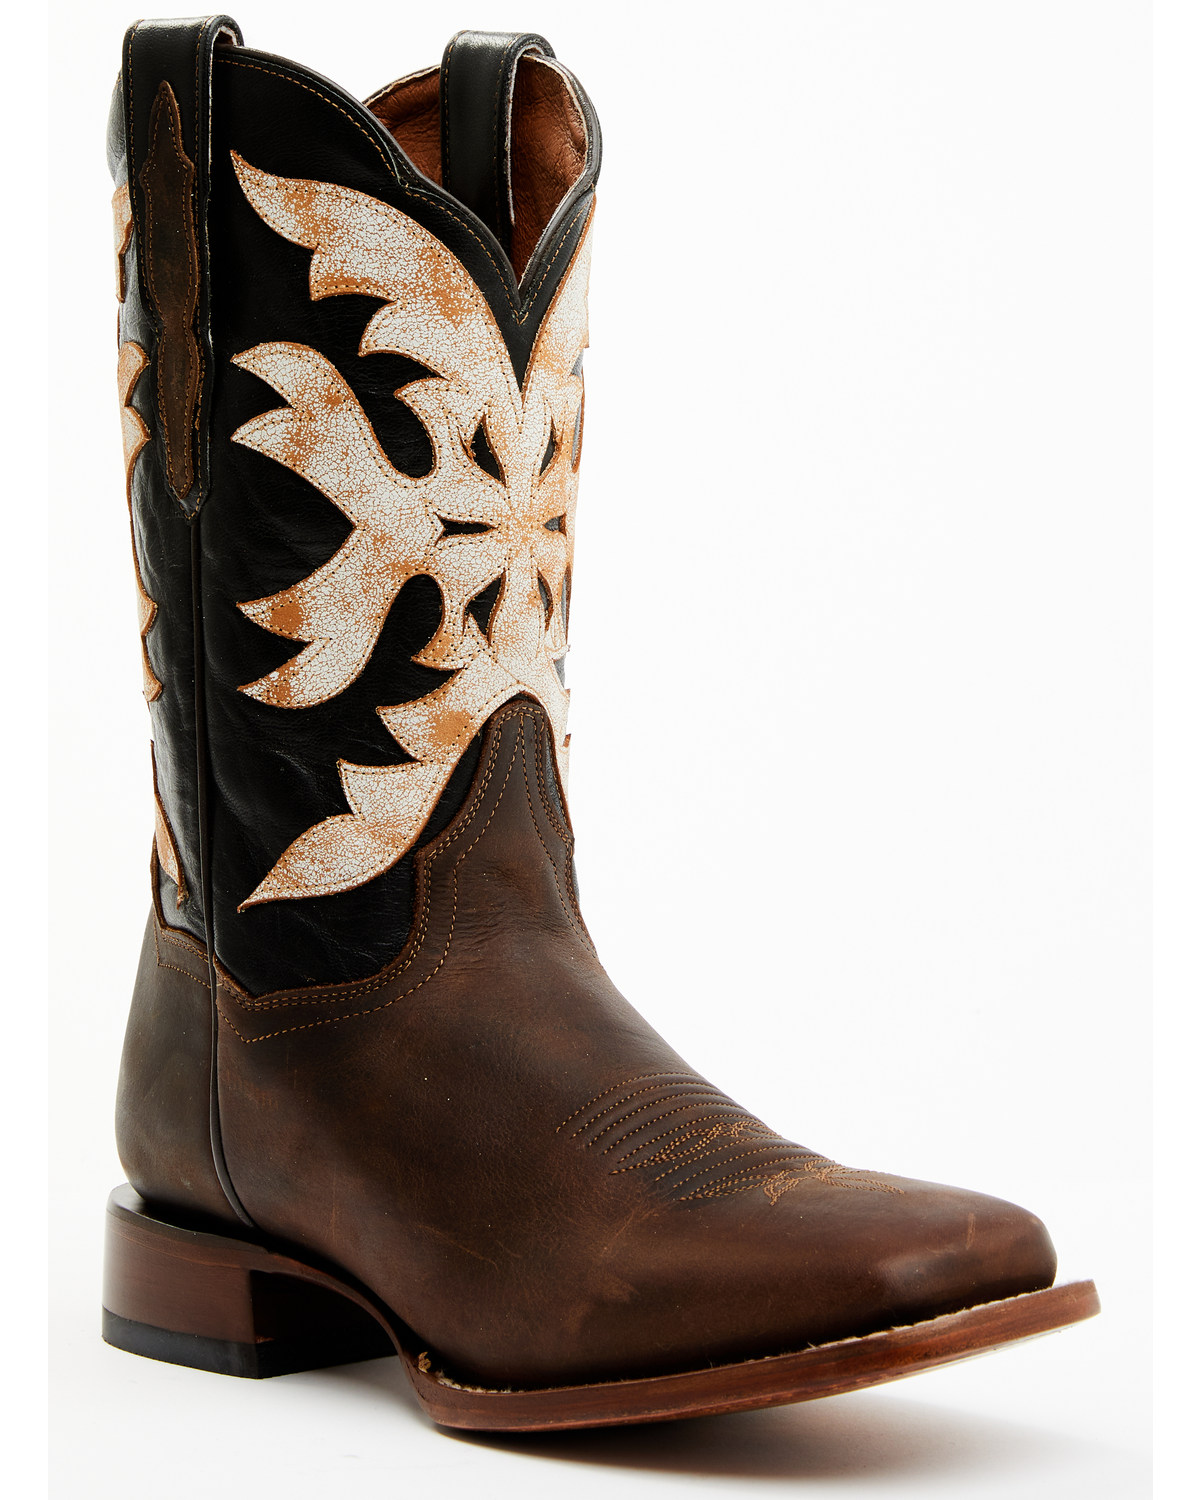 Dan Post Women's Sure Shot Embroidered Overlay Western Leather Boots - Broad Square Toe